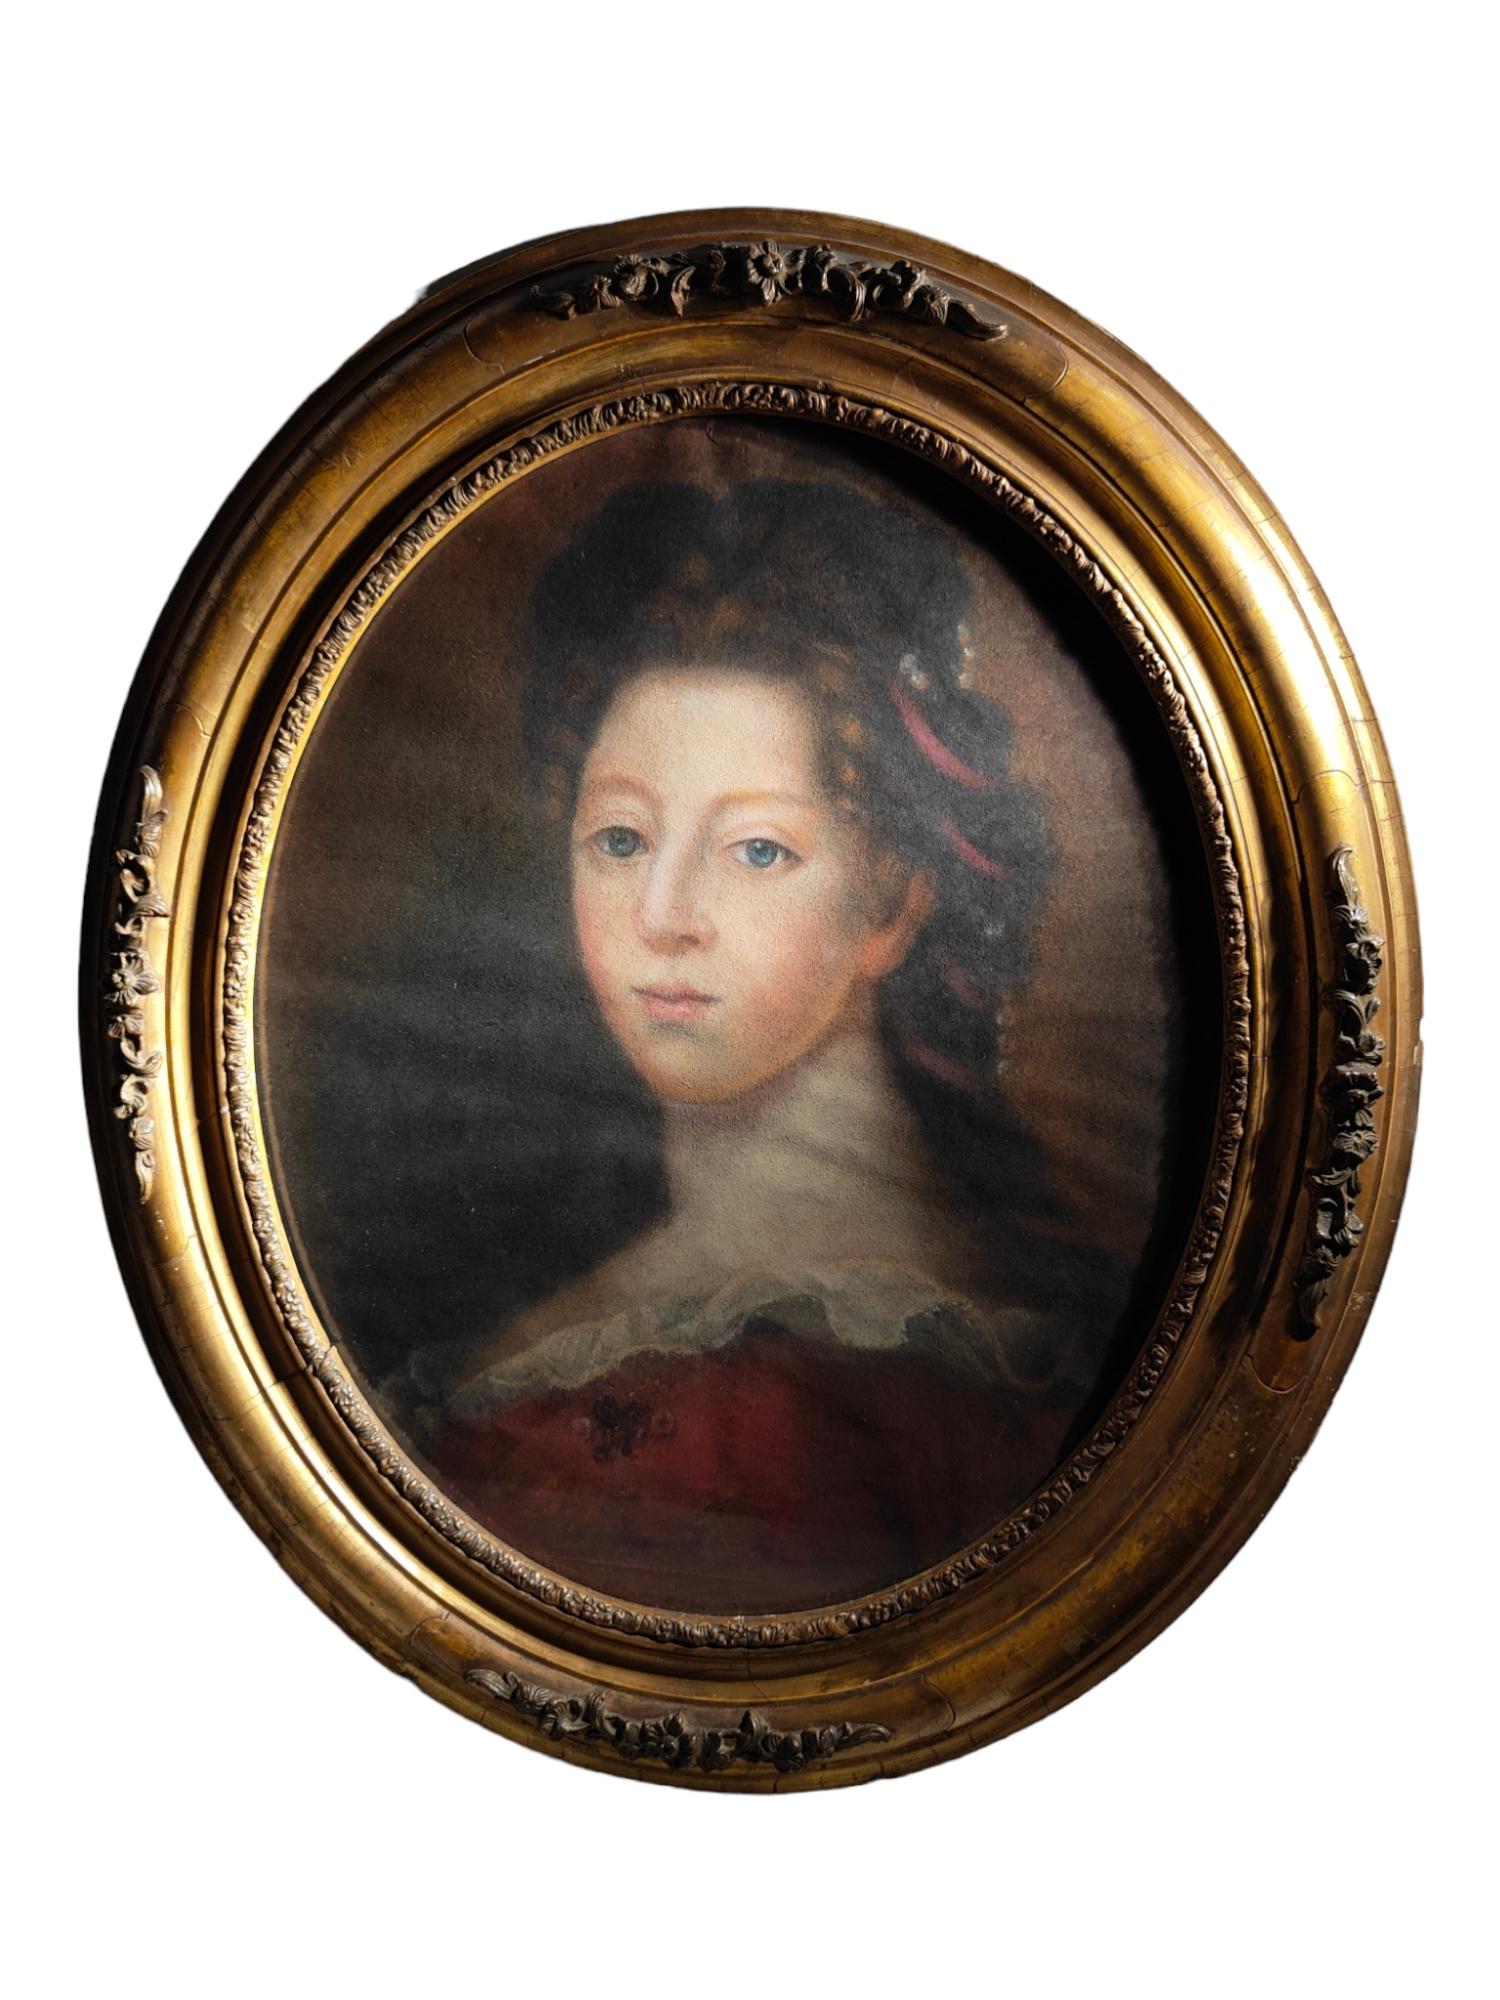 Young French Portrait 18th century
Pastel on paper. 18th century french portrait of a young girl. It is framed with a vintage frame and with glass. Very elegant and in good condition. Measures: 68x60 cm.